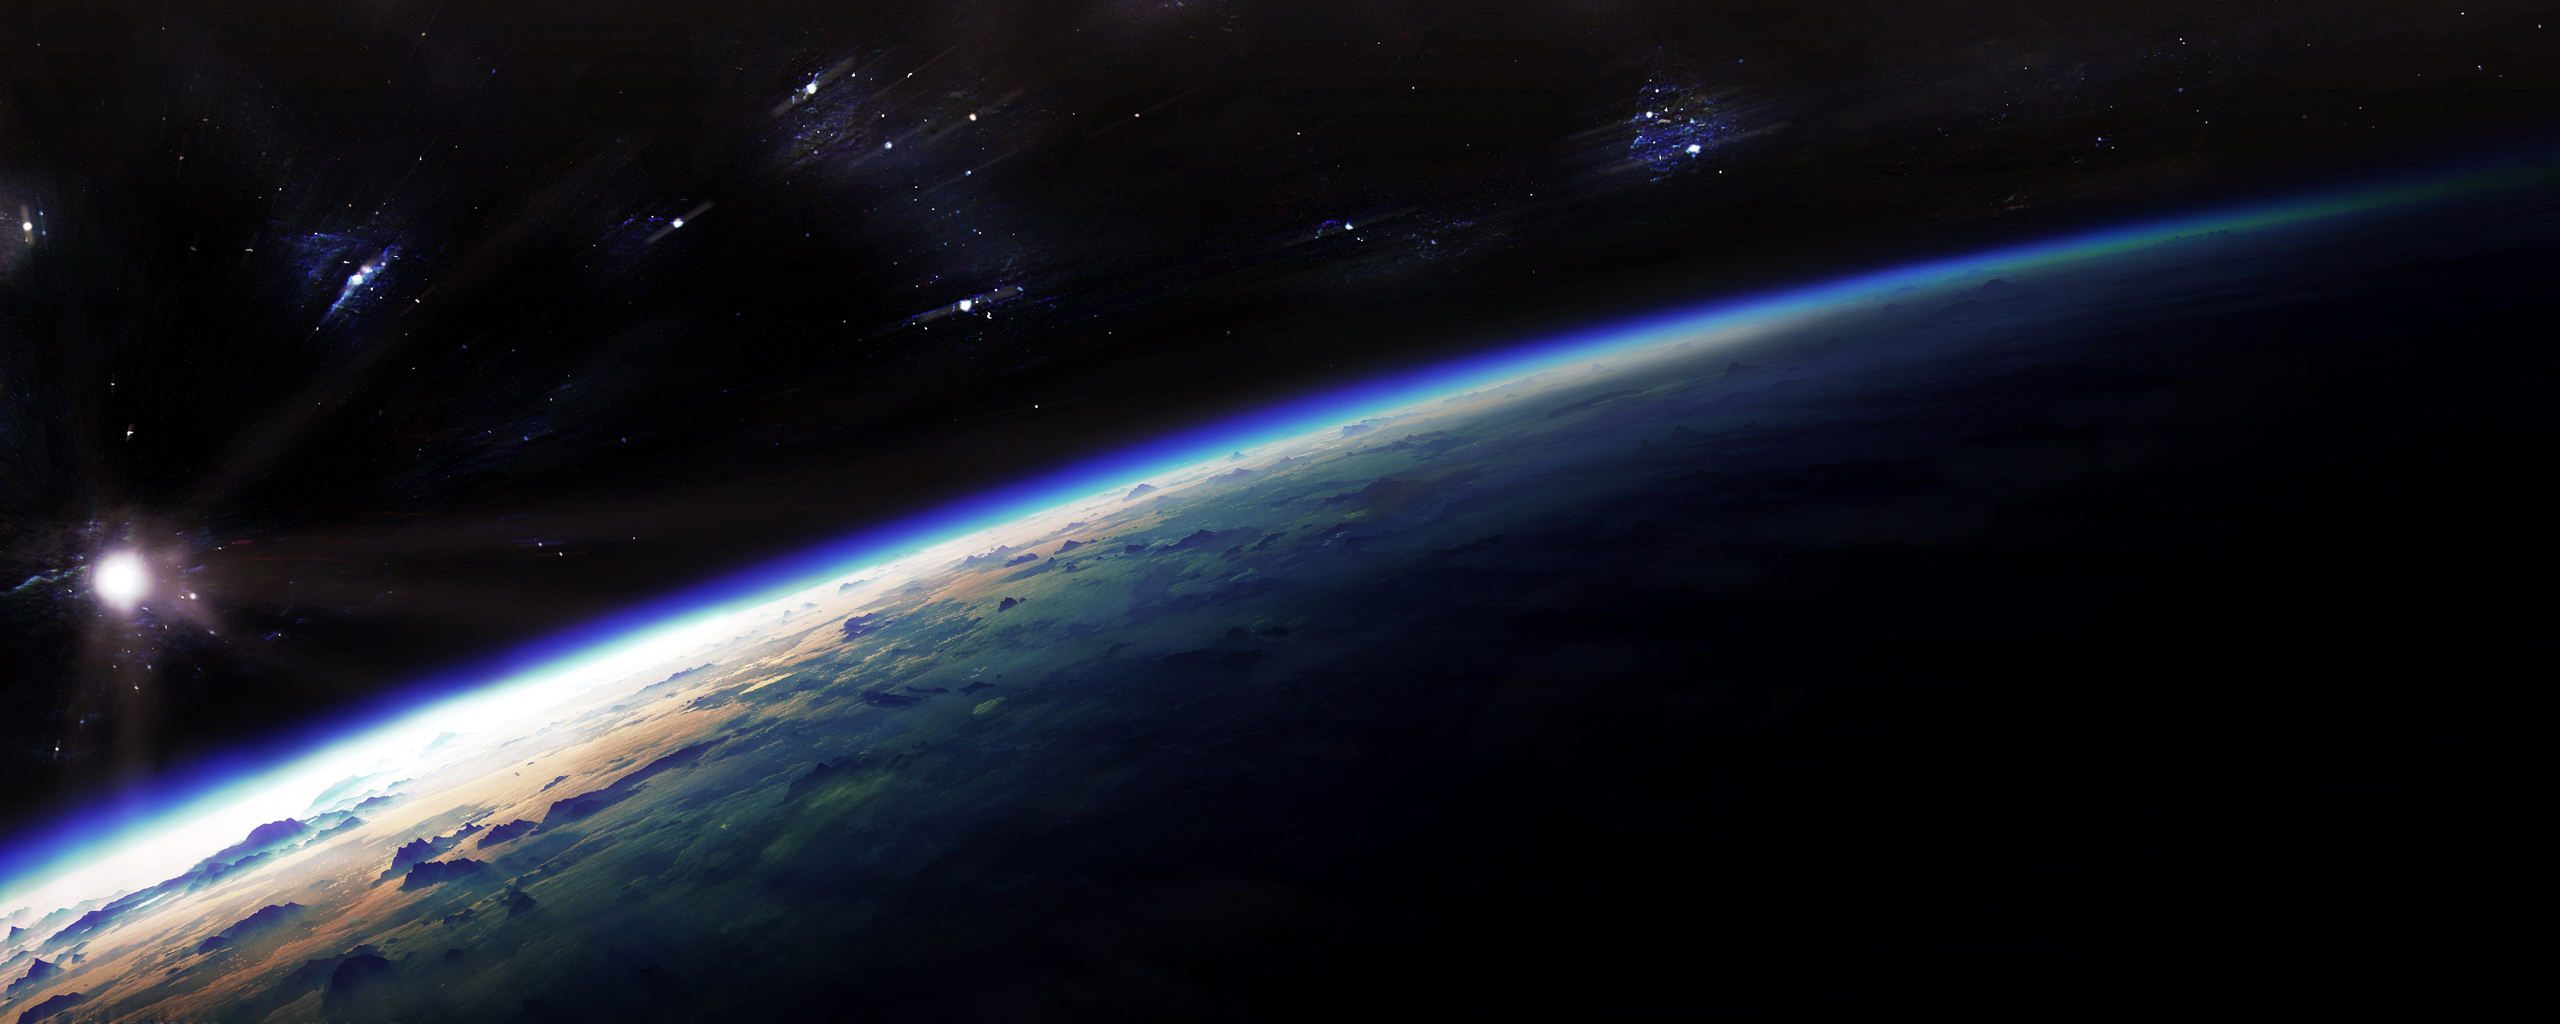 Dual Monitor Background Screen Wallpaper Space Earth